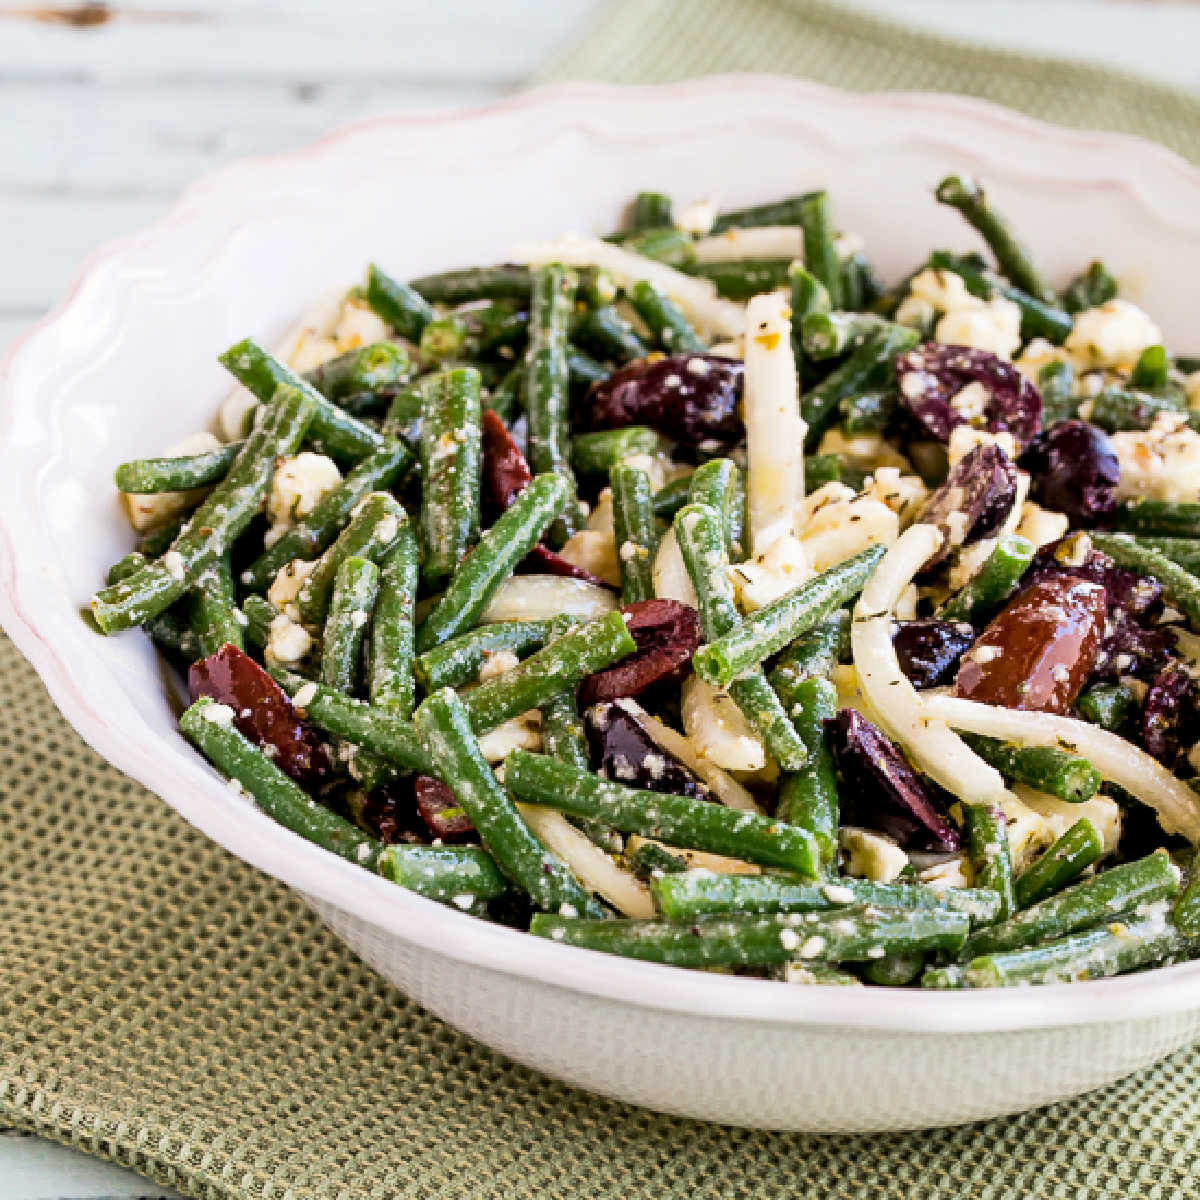 Green Bean Salad with Greek Olives and Feta shown in serving bowl.